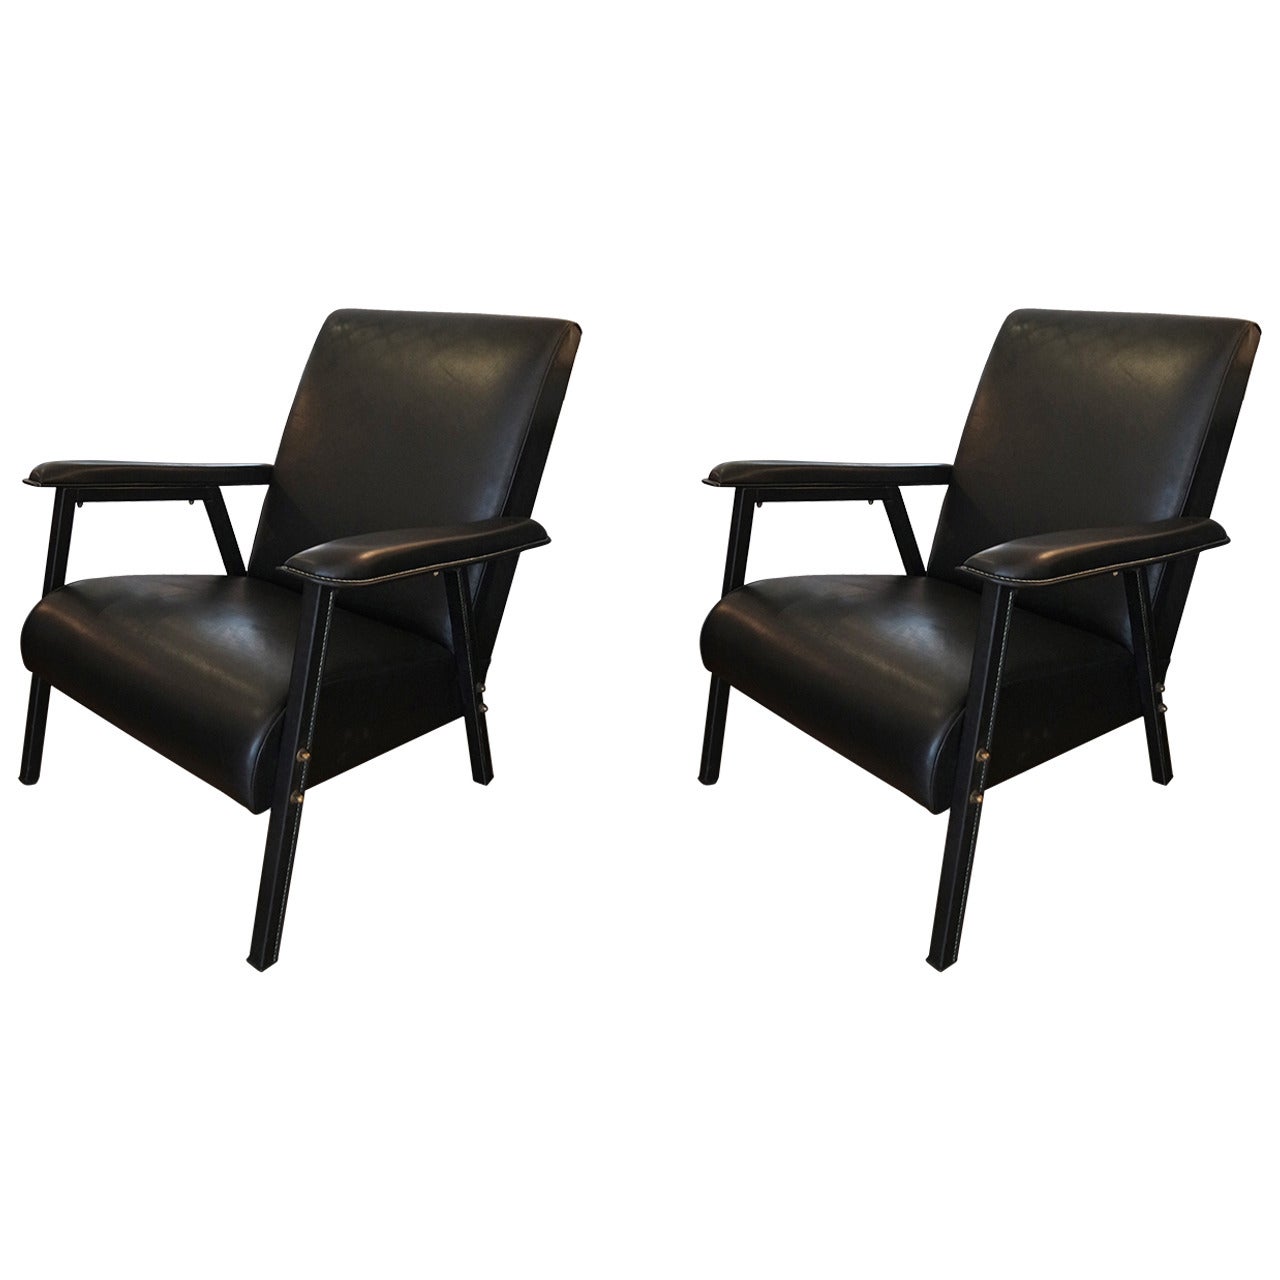 Important Pair of Jacques Quinet Armchairs